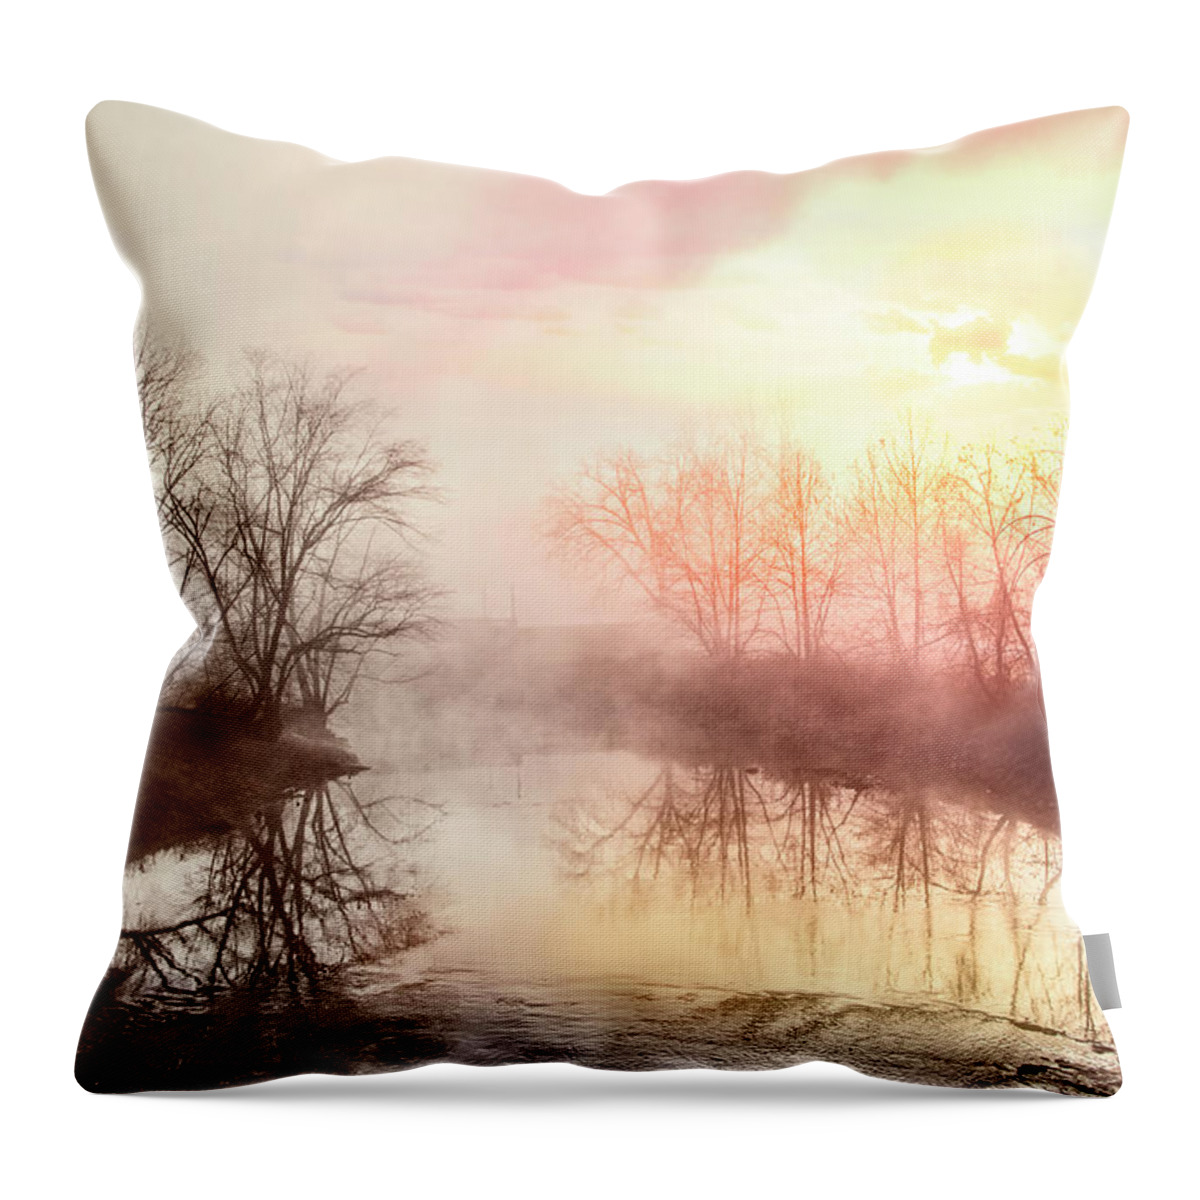 Appalachia Throw Pillow featuring the photograph Early Morning on the River by Debra and Dave Vanderlaan